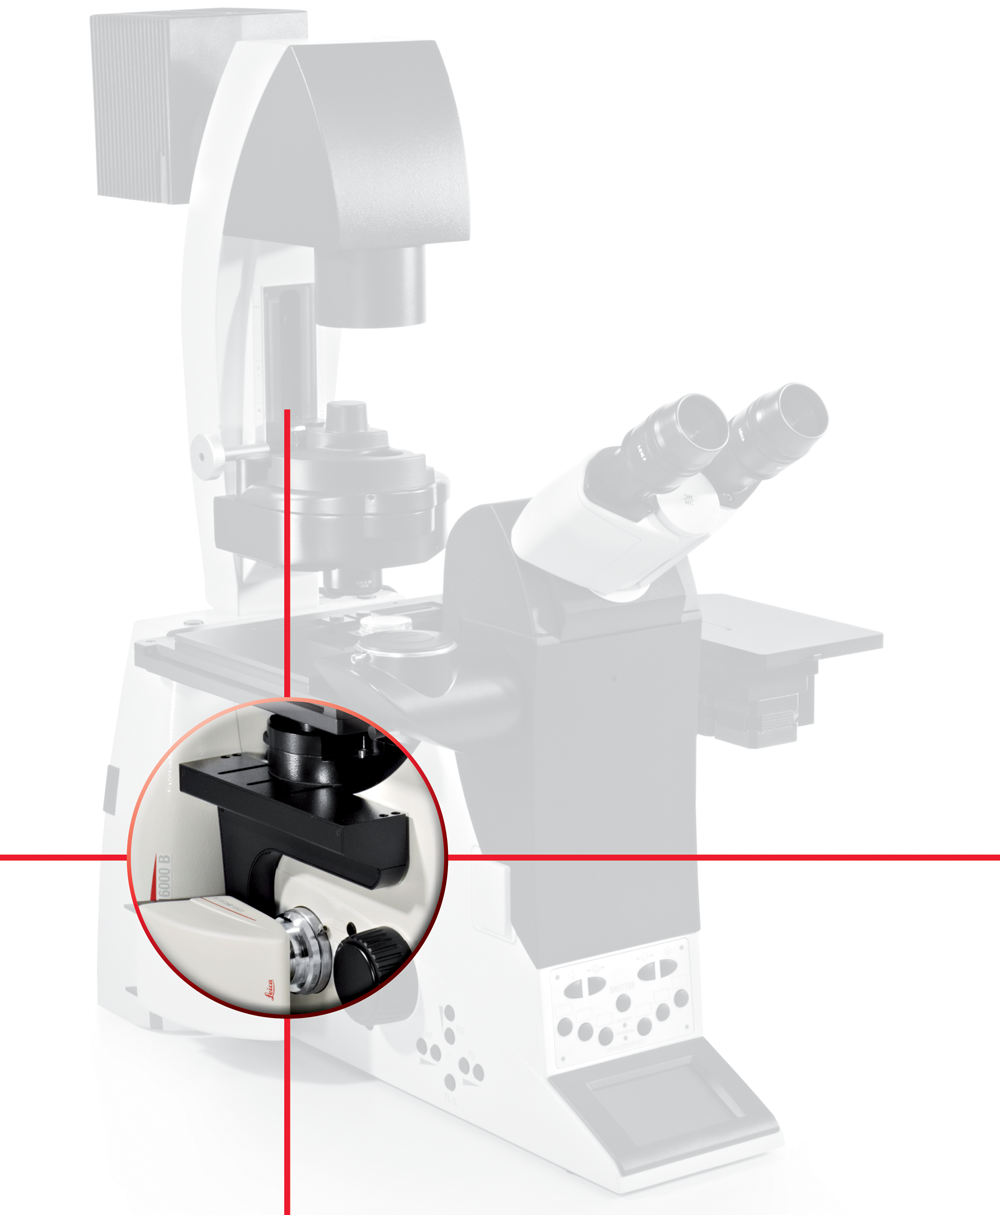 Automated Microscope System Leica DMI6000 B with Adaptive Focus Control